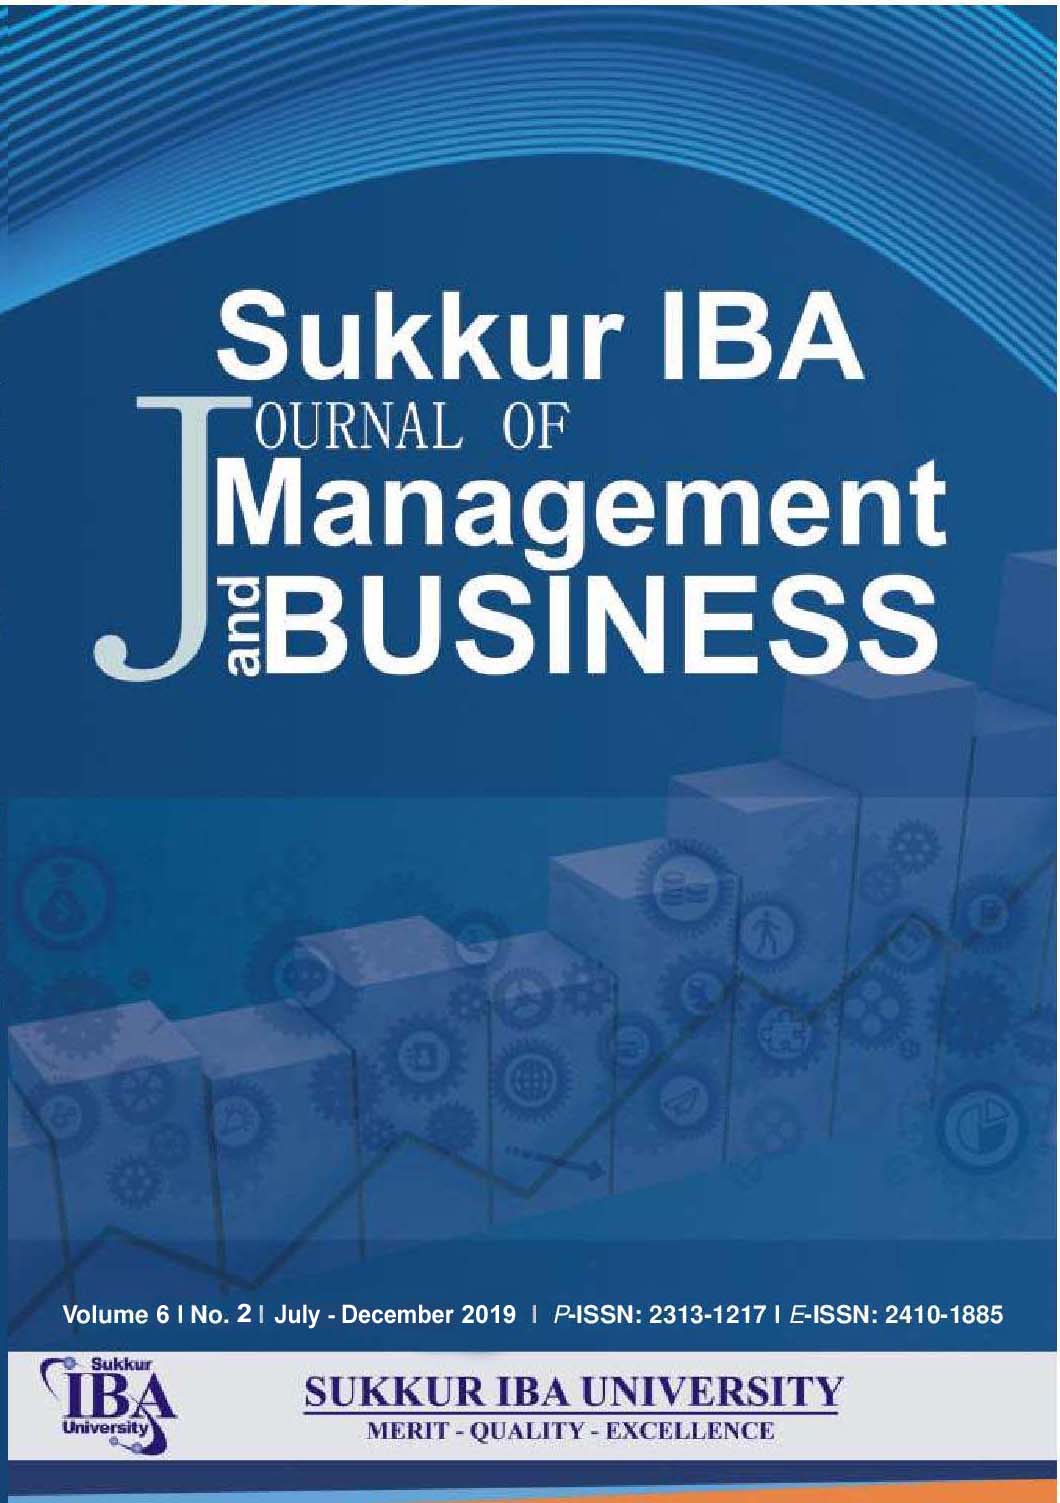 					View Vol. 6 No. 2 (2019): Sukkur IBA Journal of Management and Business
				